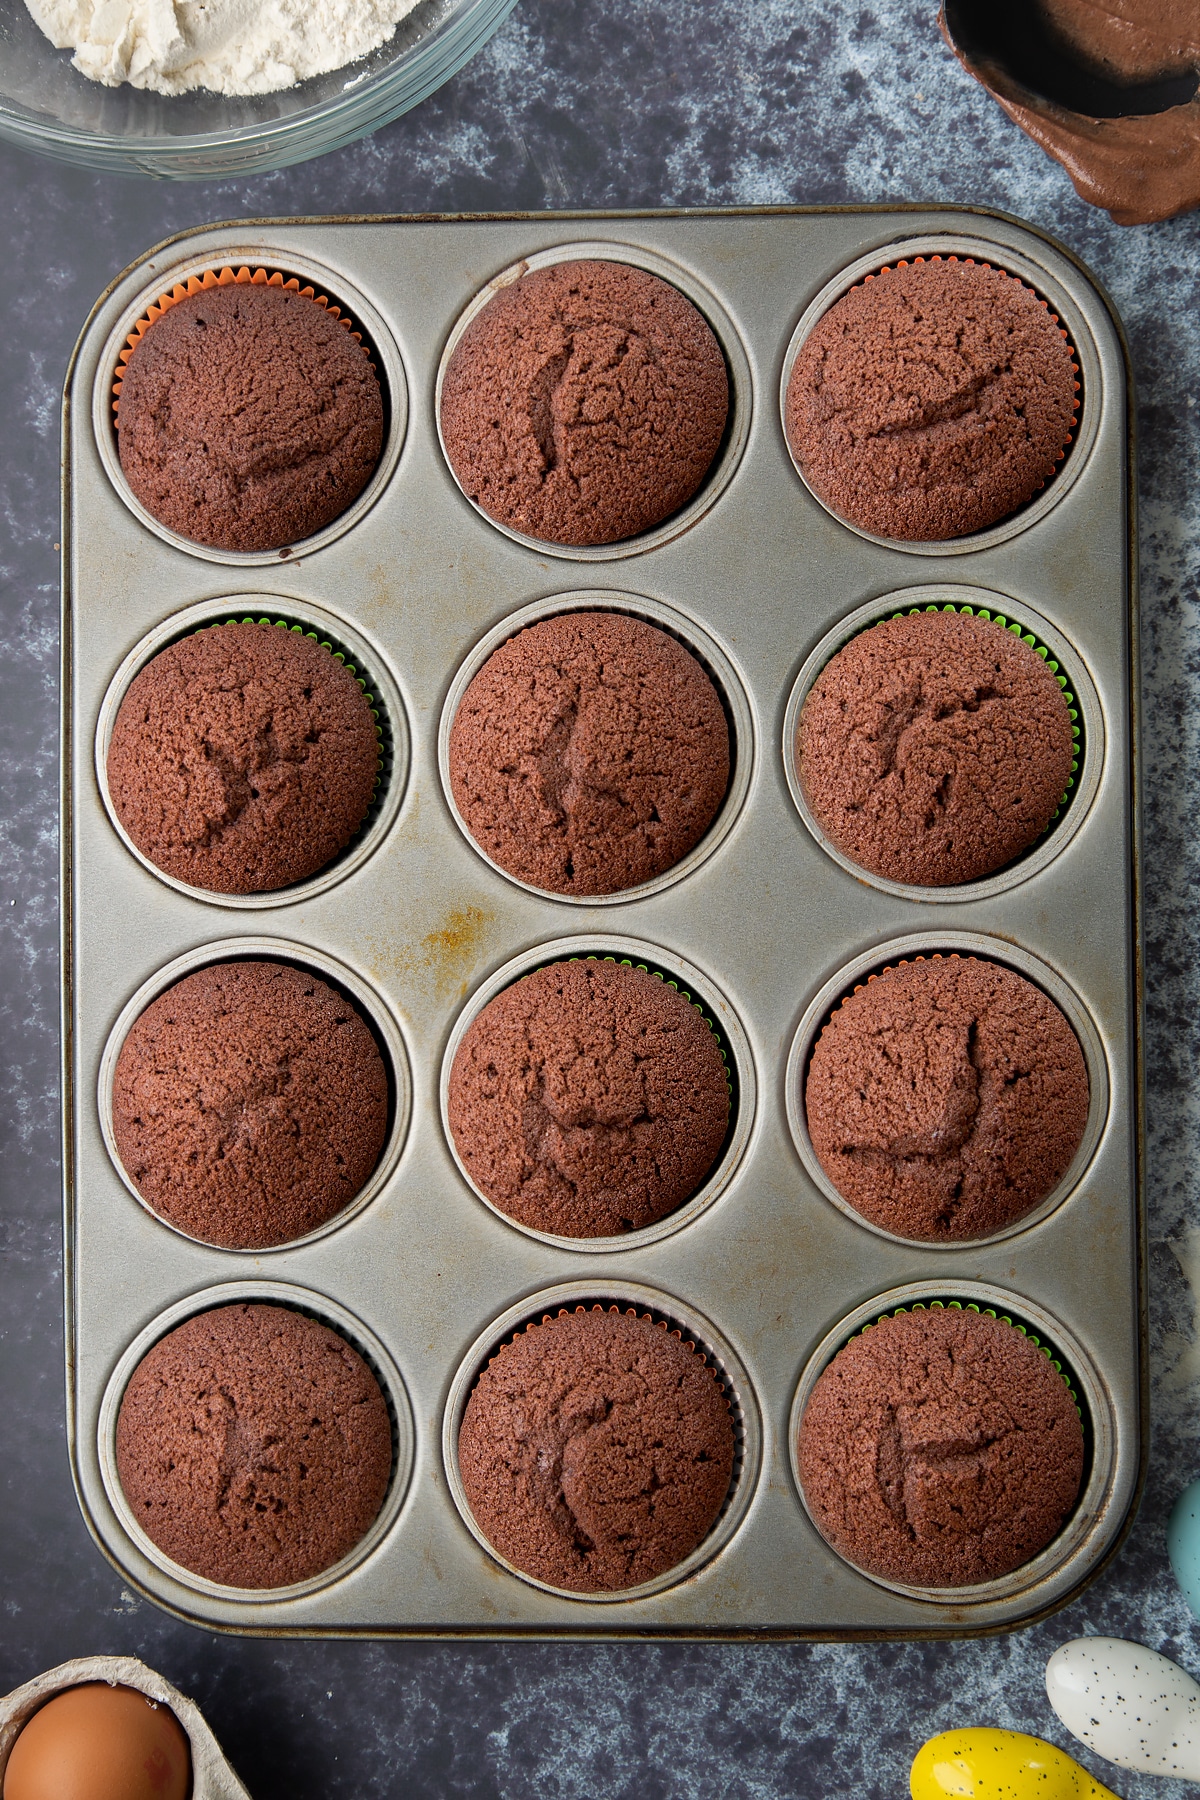 Chocolate cupcakes in a 12-hole muffin tray. Ingredients to make slime cupcakes surround the tray.